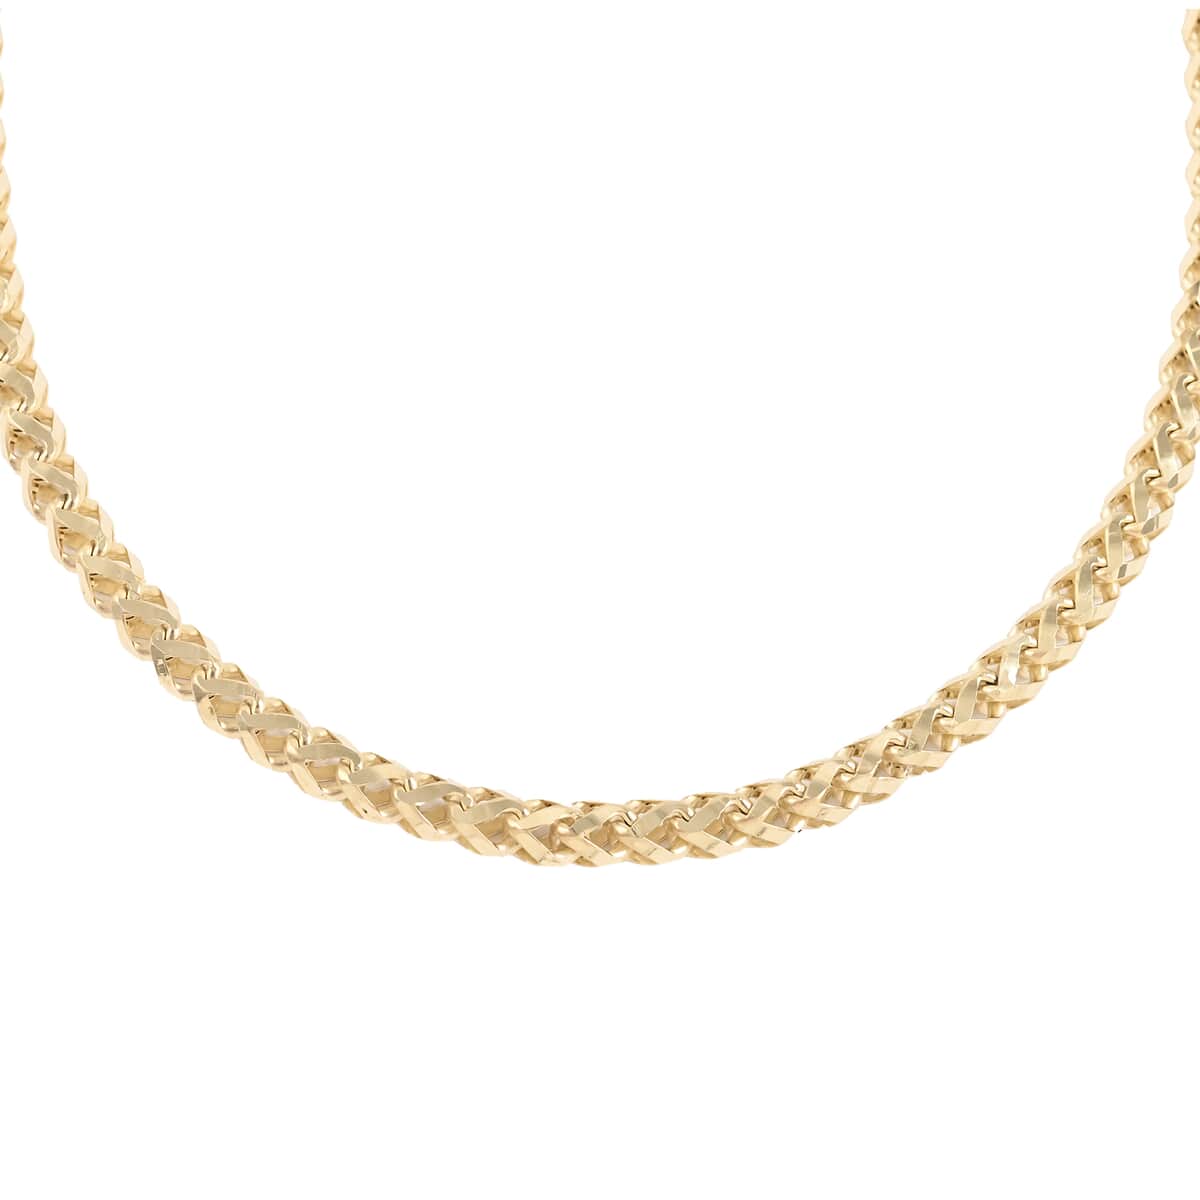 California Closeout Deal 10K Yellow Gold 5.8mm Round Diamond-Cut Necklace 24 Inches 35.20 Grams image number 0